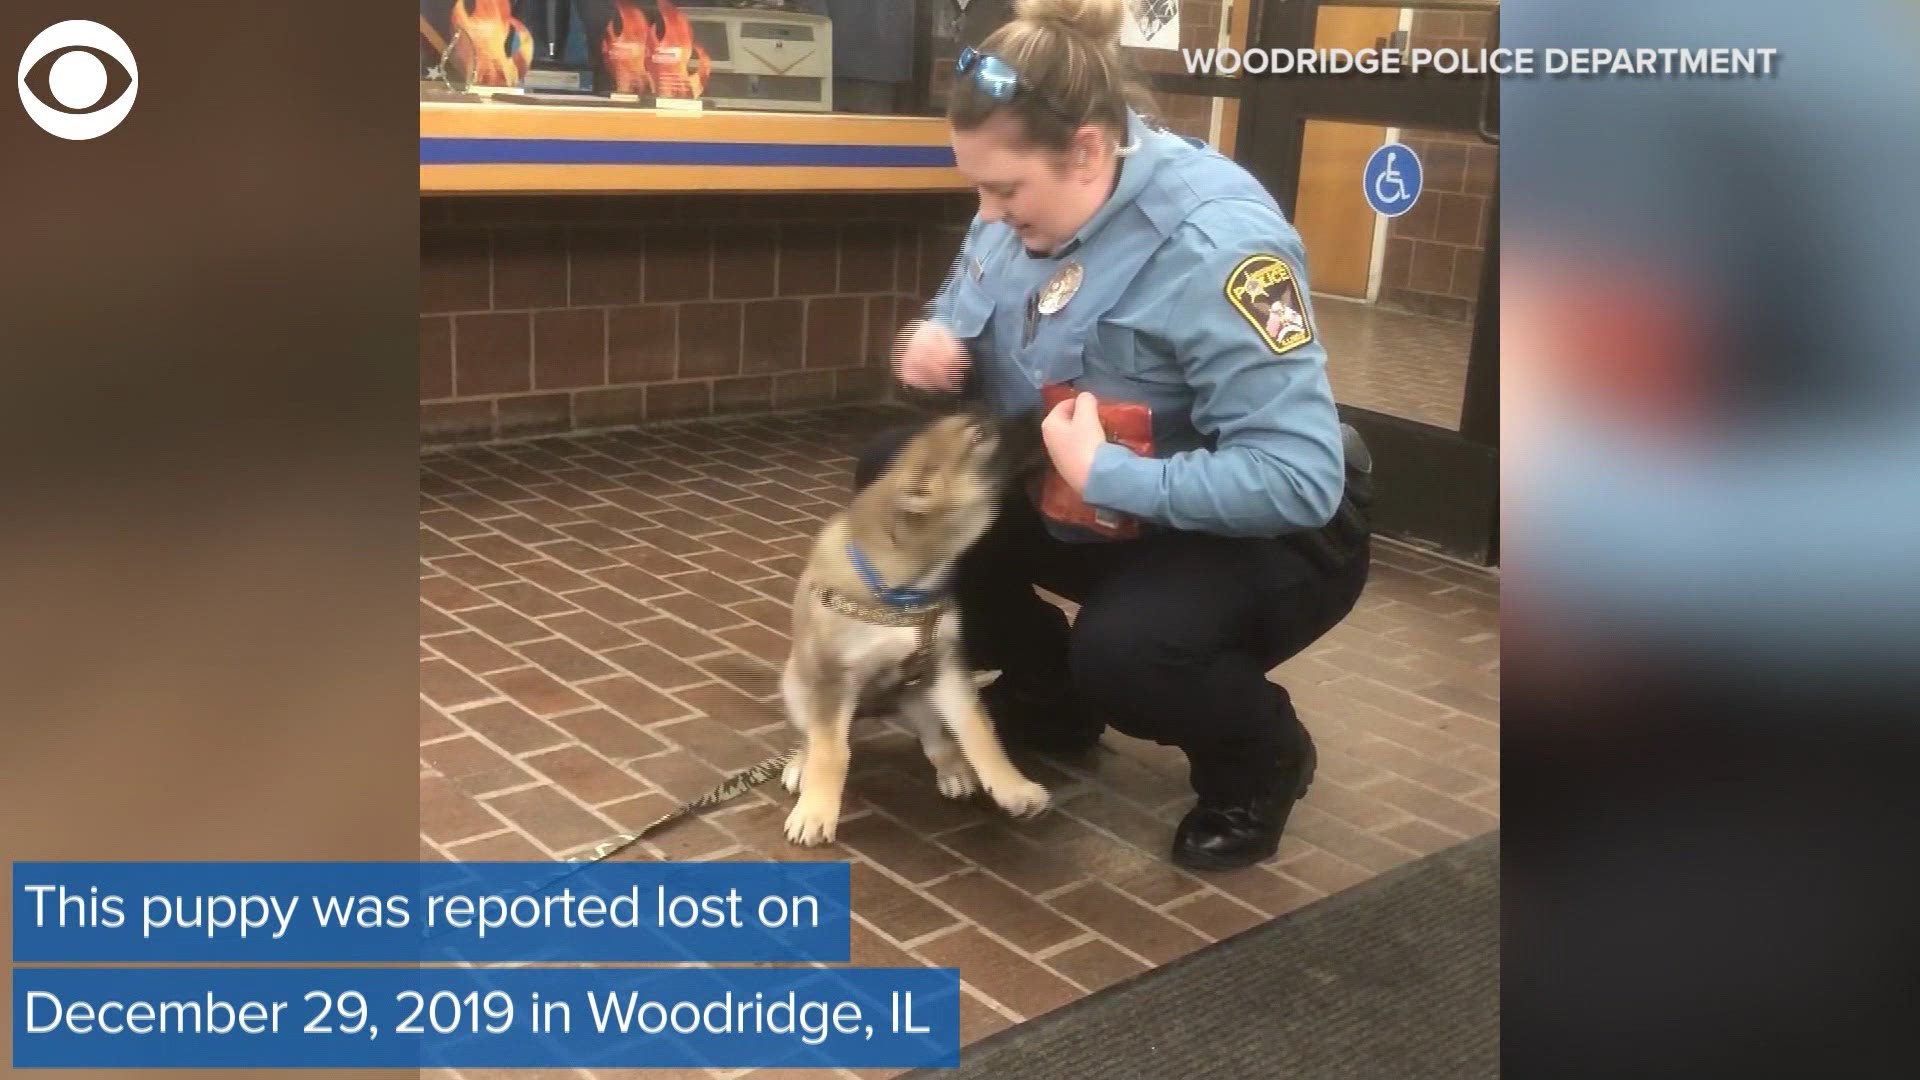 An Illinois police officer was reunited with a puppy she rescued that was reported lost at the end of last year. Take a look at the adorable moment they met again.